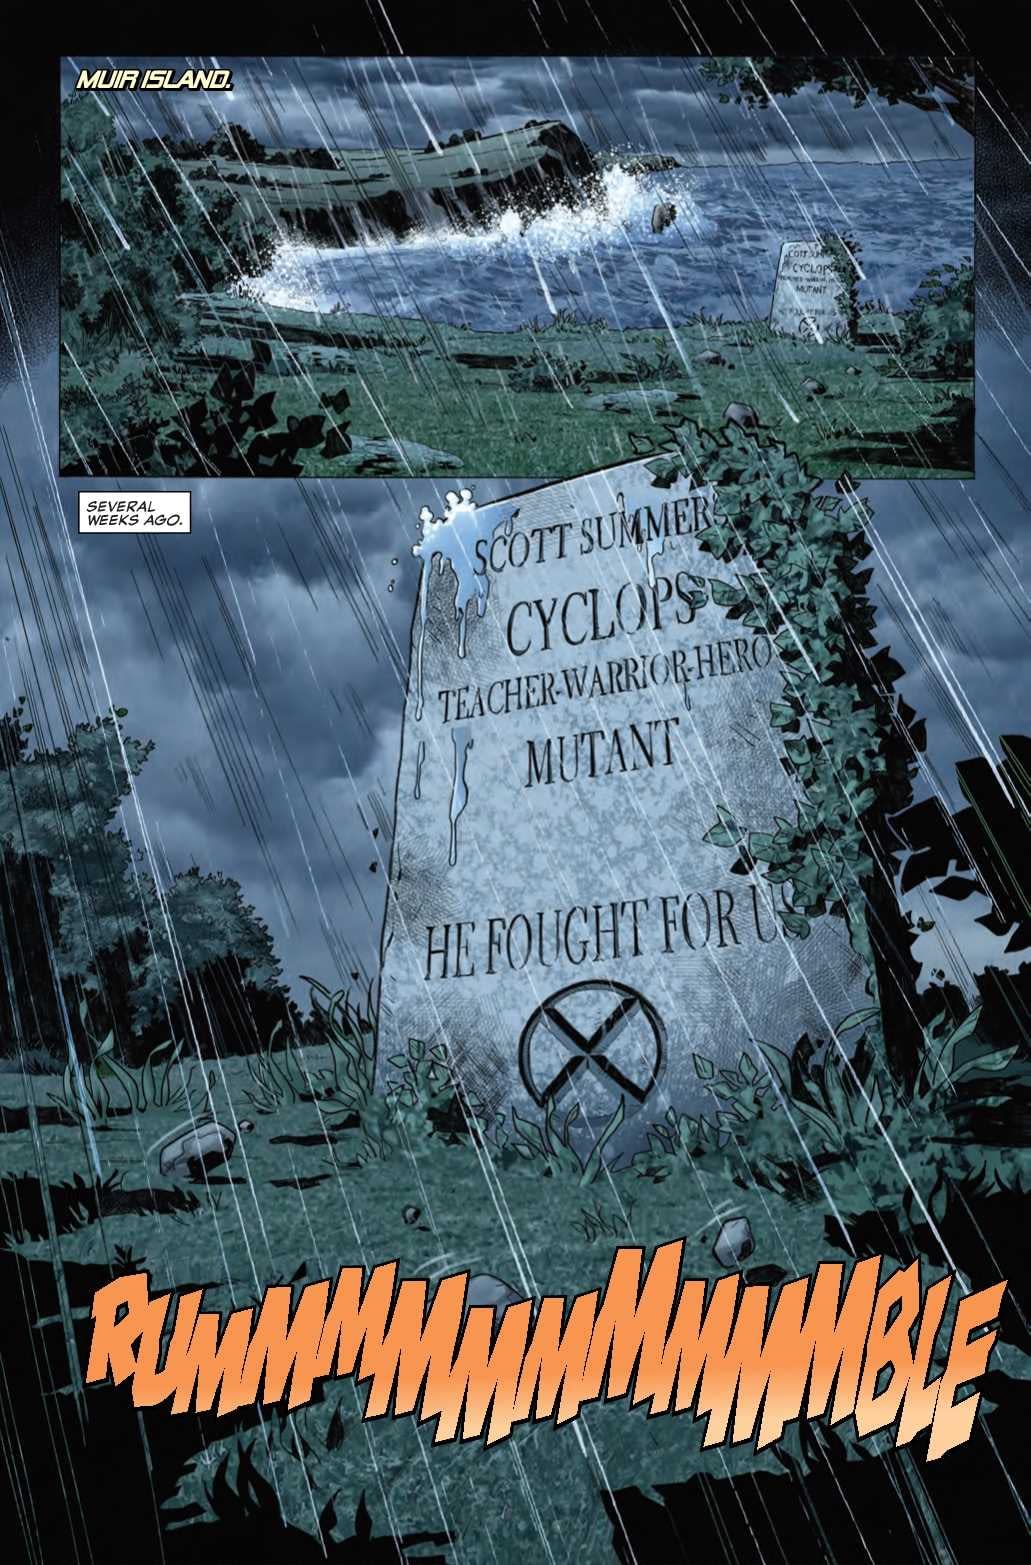 Cyclops Rises from the Grave&#8230; Literally&#8230; in Next Week's Uncanny X-Men Annual